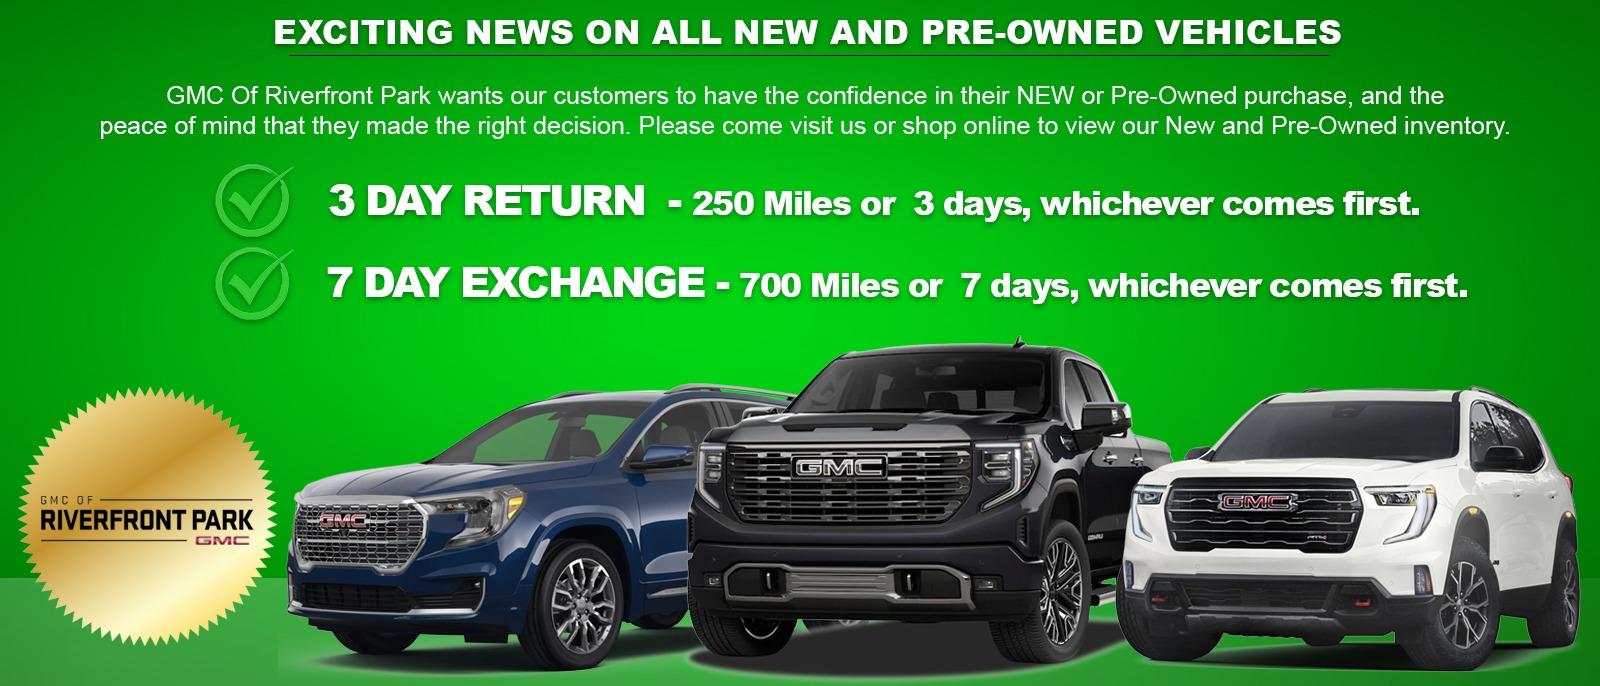 GMC Of Riverfront Park wants our customers to have the confidence in their New or  Pre-Owned purchase, and the peace of mind that they made the right decision.  Please visit our Online inventory or come on in to visit our dealership!